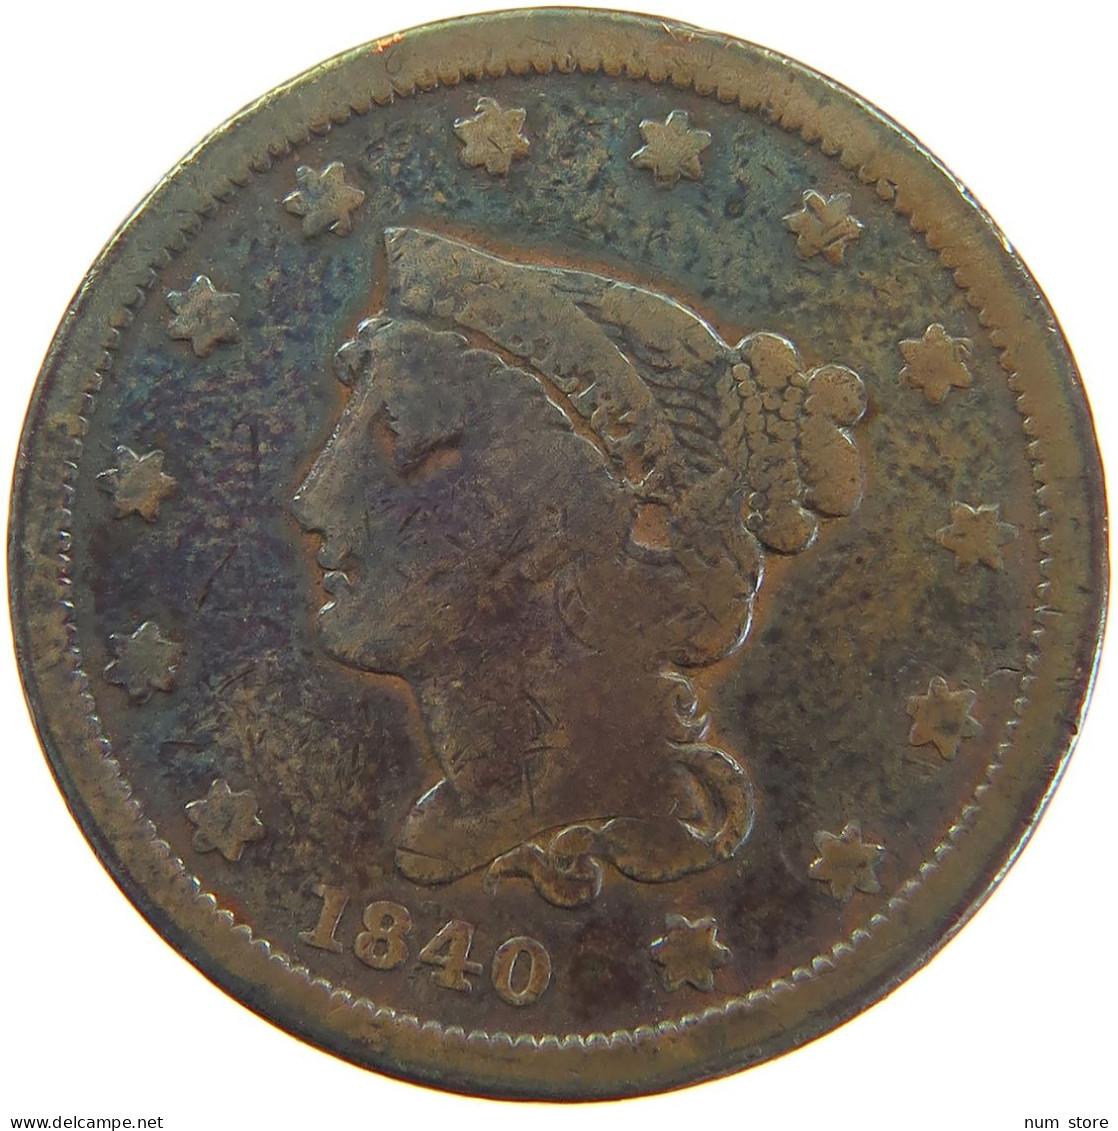 UNITED STATES OF AMERICA LARGE CENT 1840 Braided Hair #t024 0157 - 1840-1857: Braided Hair